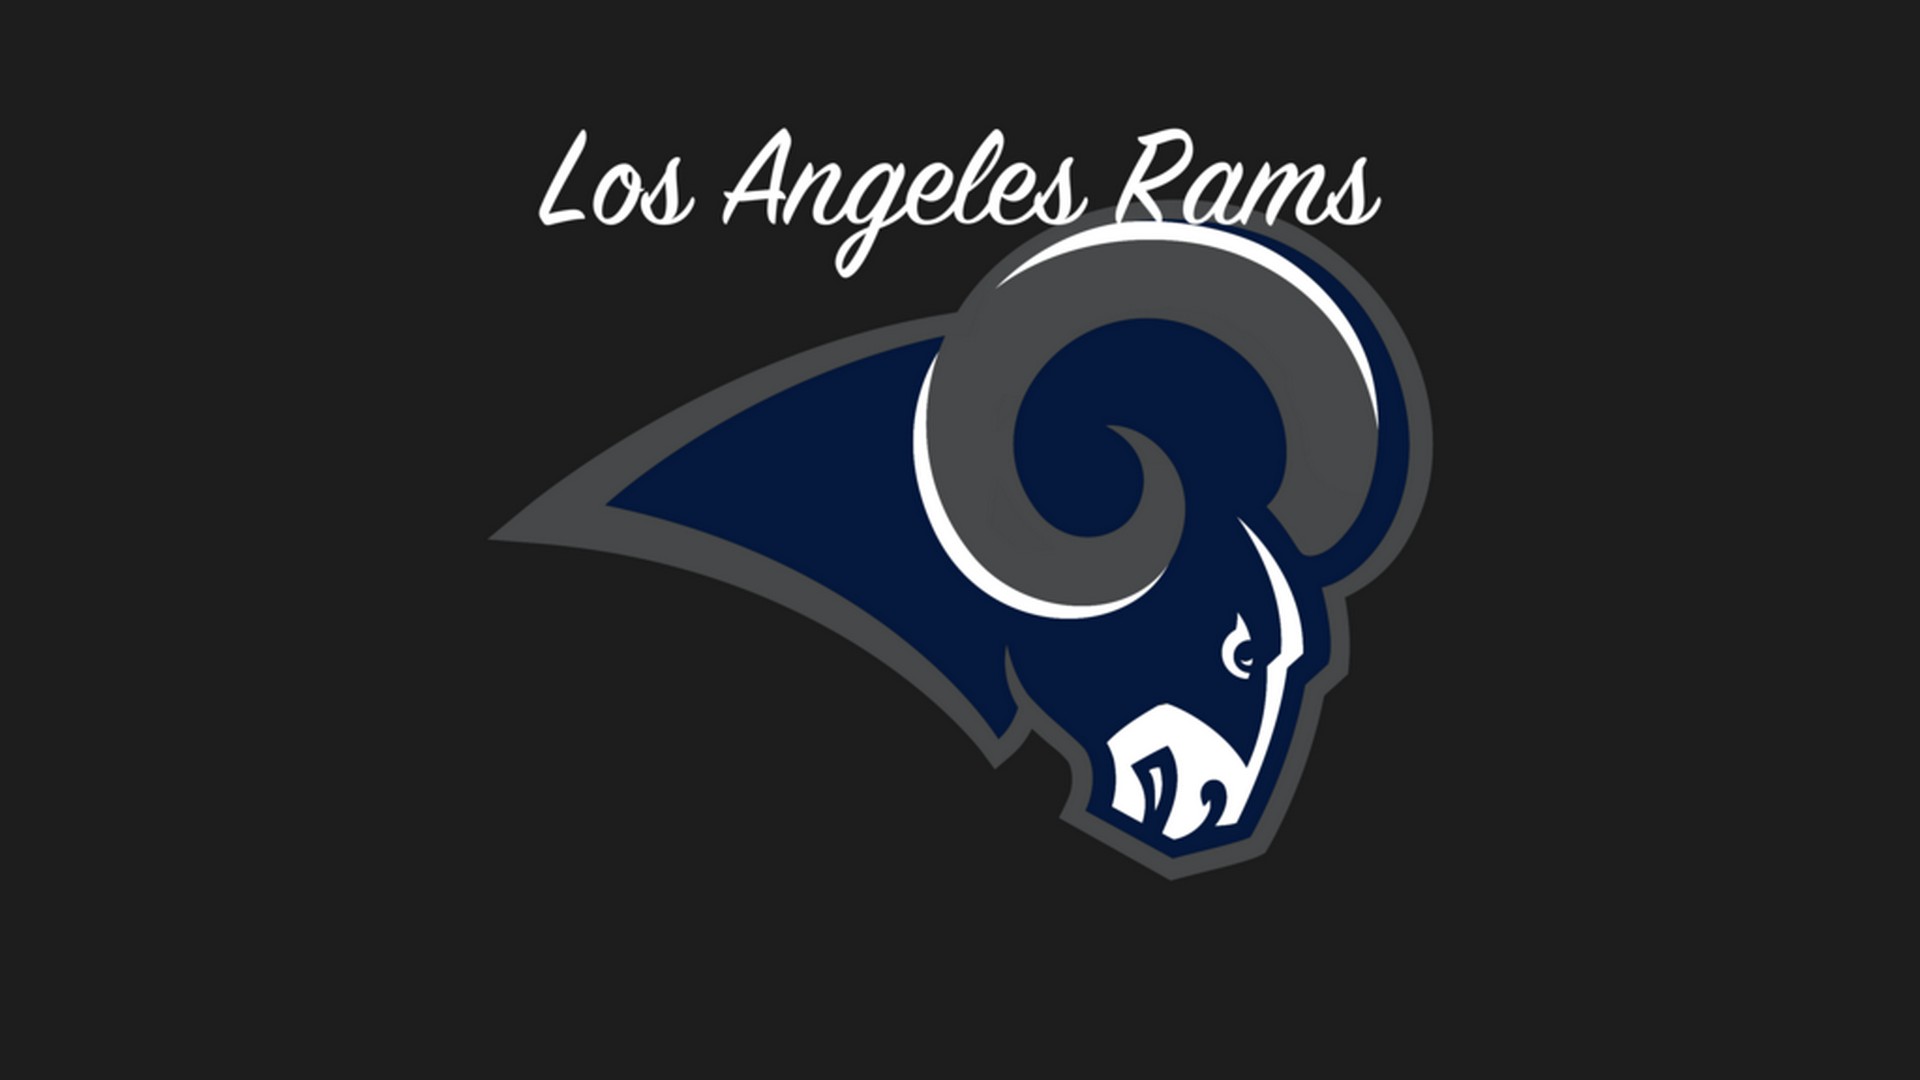 Los Angeles Rams HD Wallpapers With Resolution 1920X1080 pixel. You can make this wallpaper for your Mac or Windows Desktop Background, iPhone, Android or Tablet and another Smartphone device for free